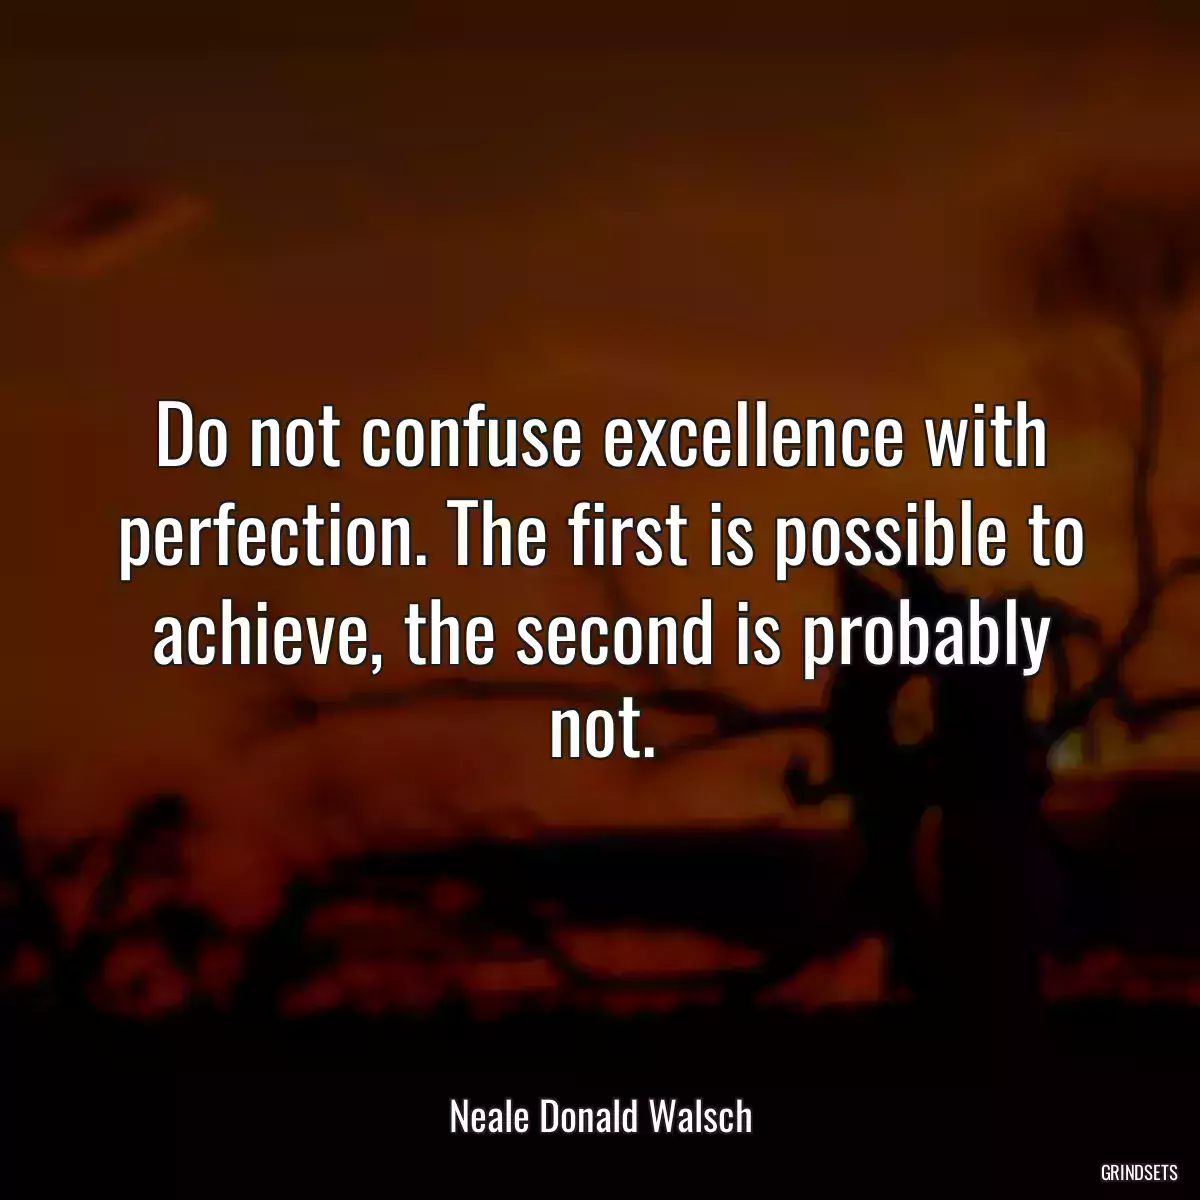 Do not confuse excellence with perfection. The first is possible to achieve, the second is probably not.